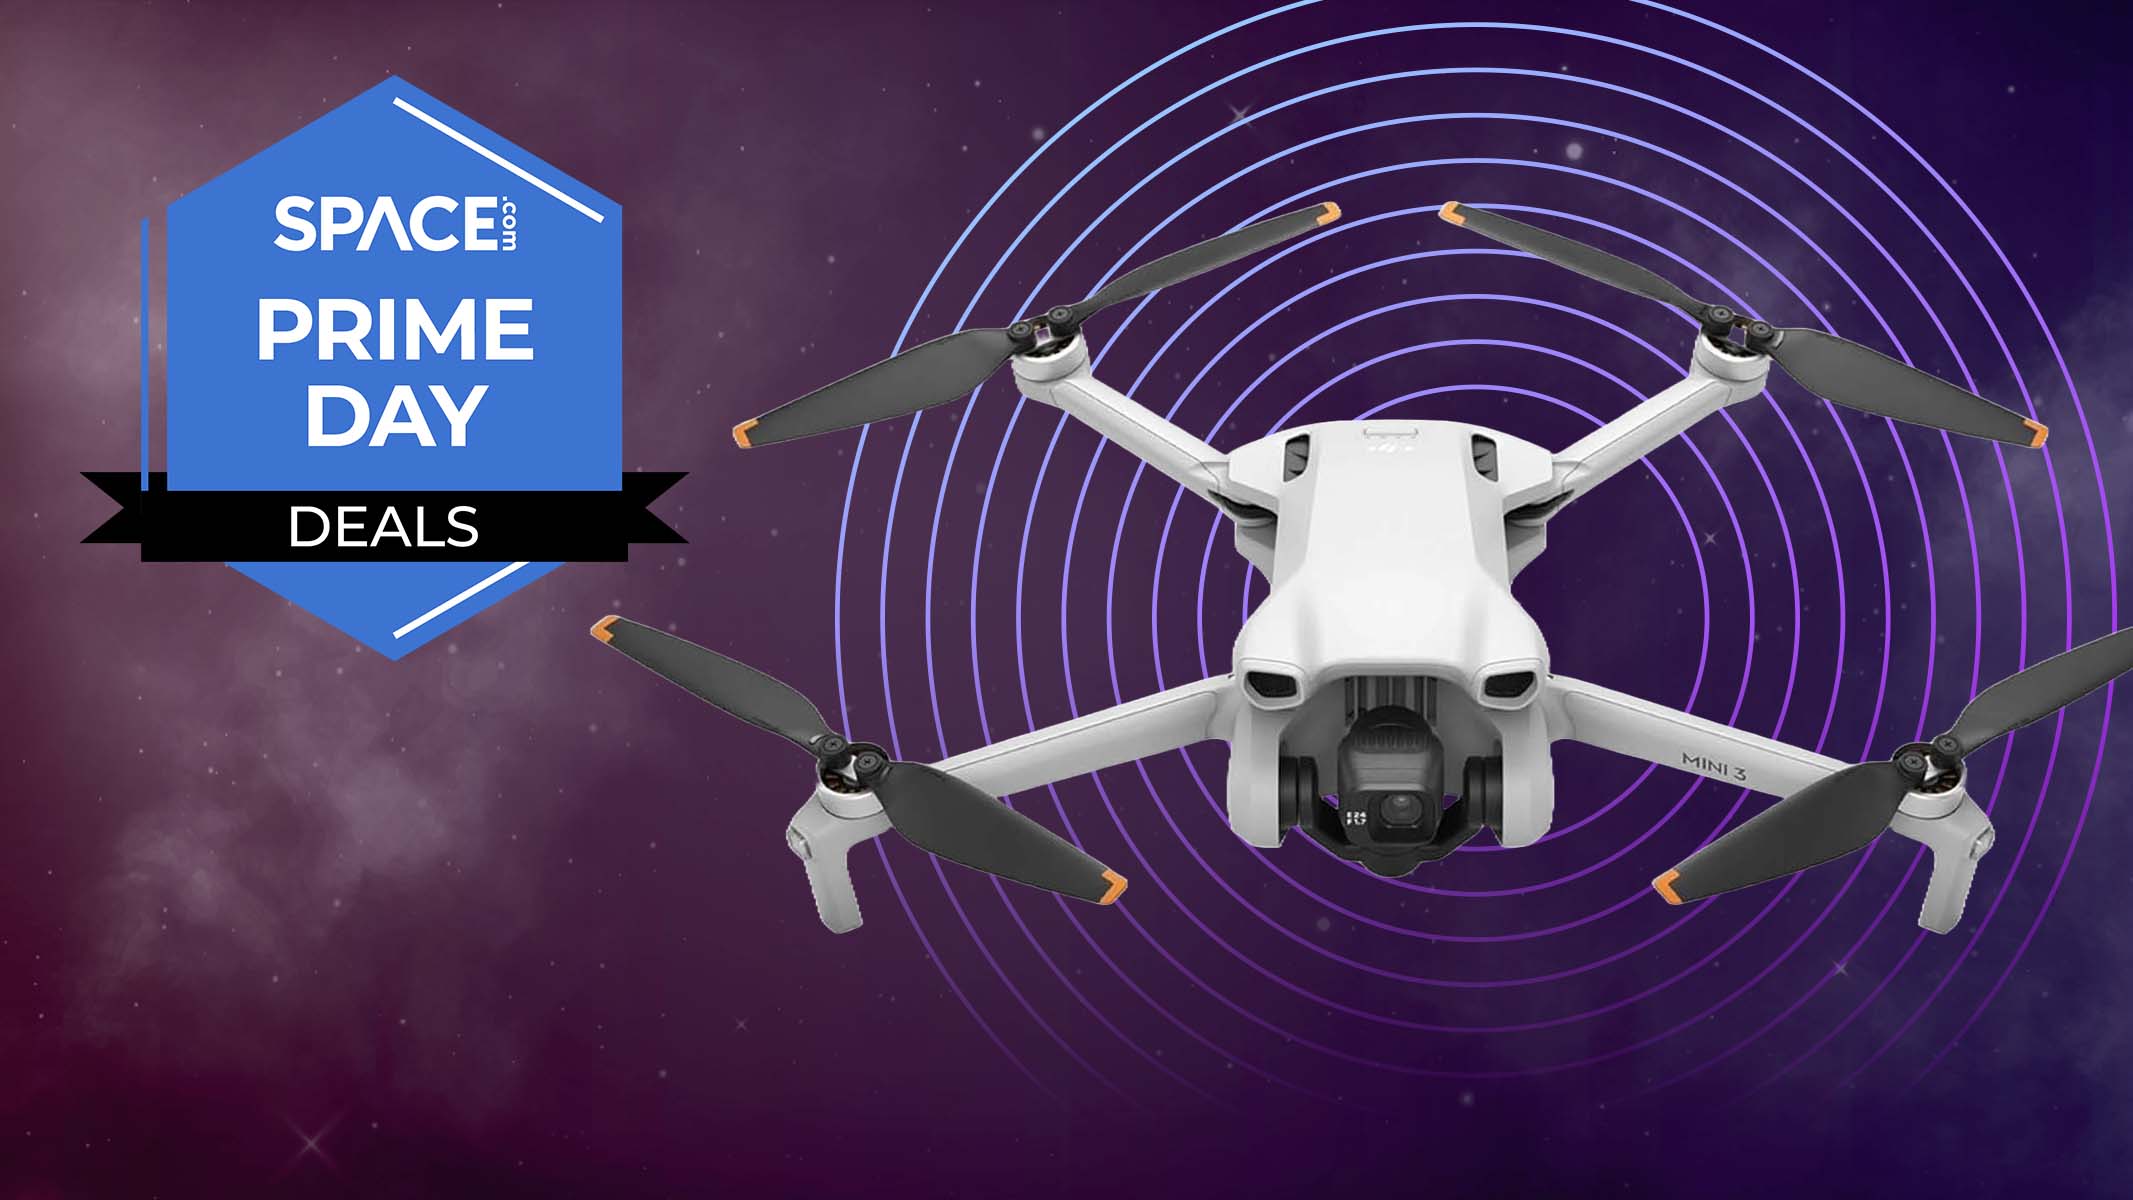  Soar through the skies with the DJI Mini 3 Fly More Combo camera drone, $94 off in this early Prime Day deal 